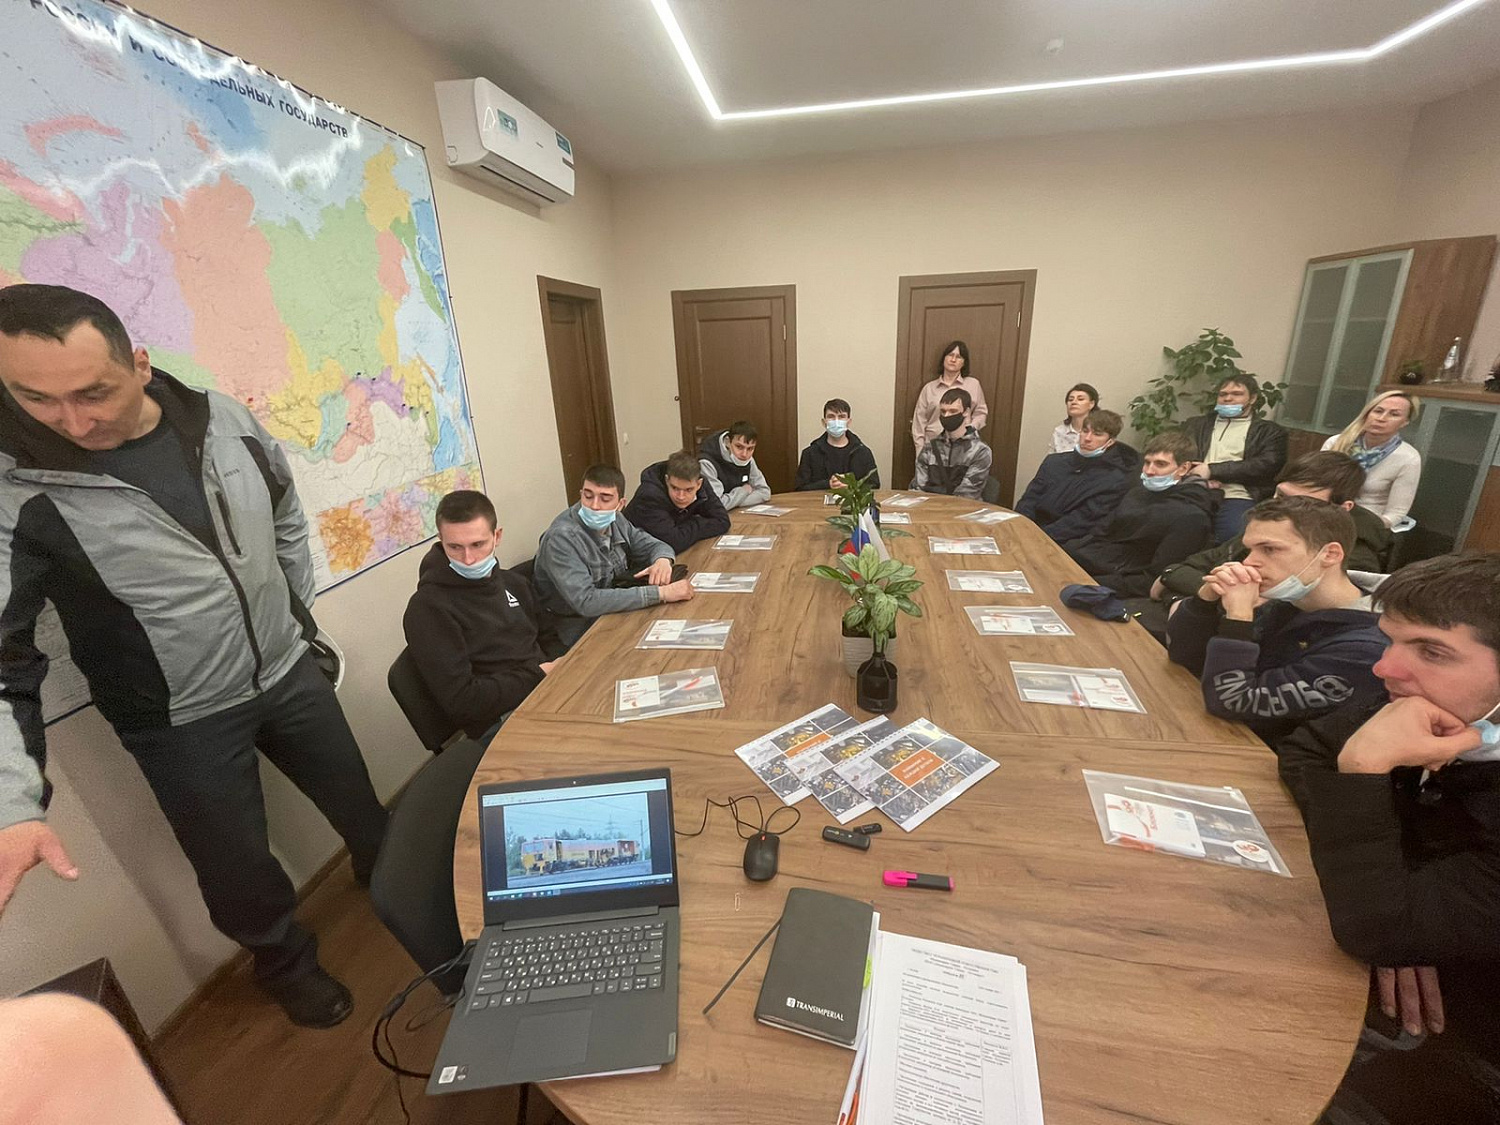 On April 13 and 14, 2022, an open day was held on the territory of the Ulyanovsk branch for graduates of the railway technical school.